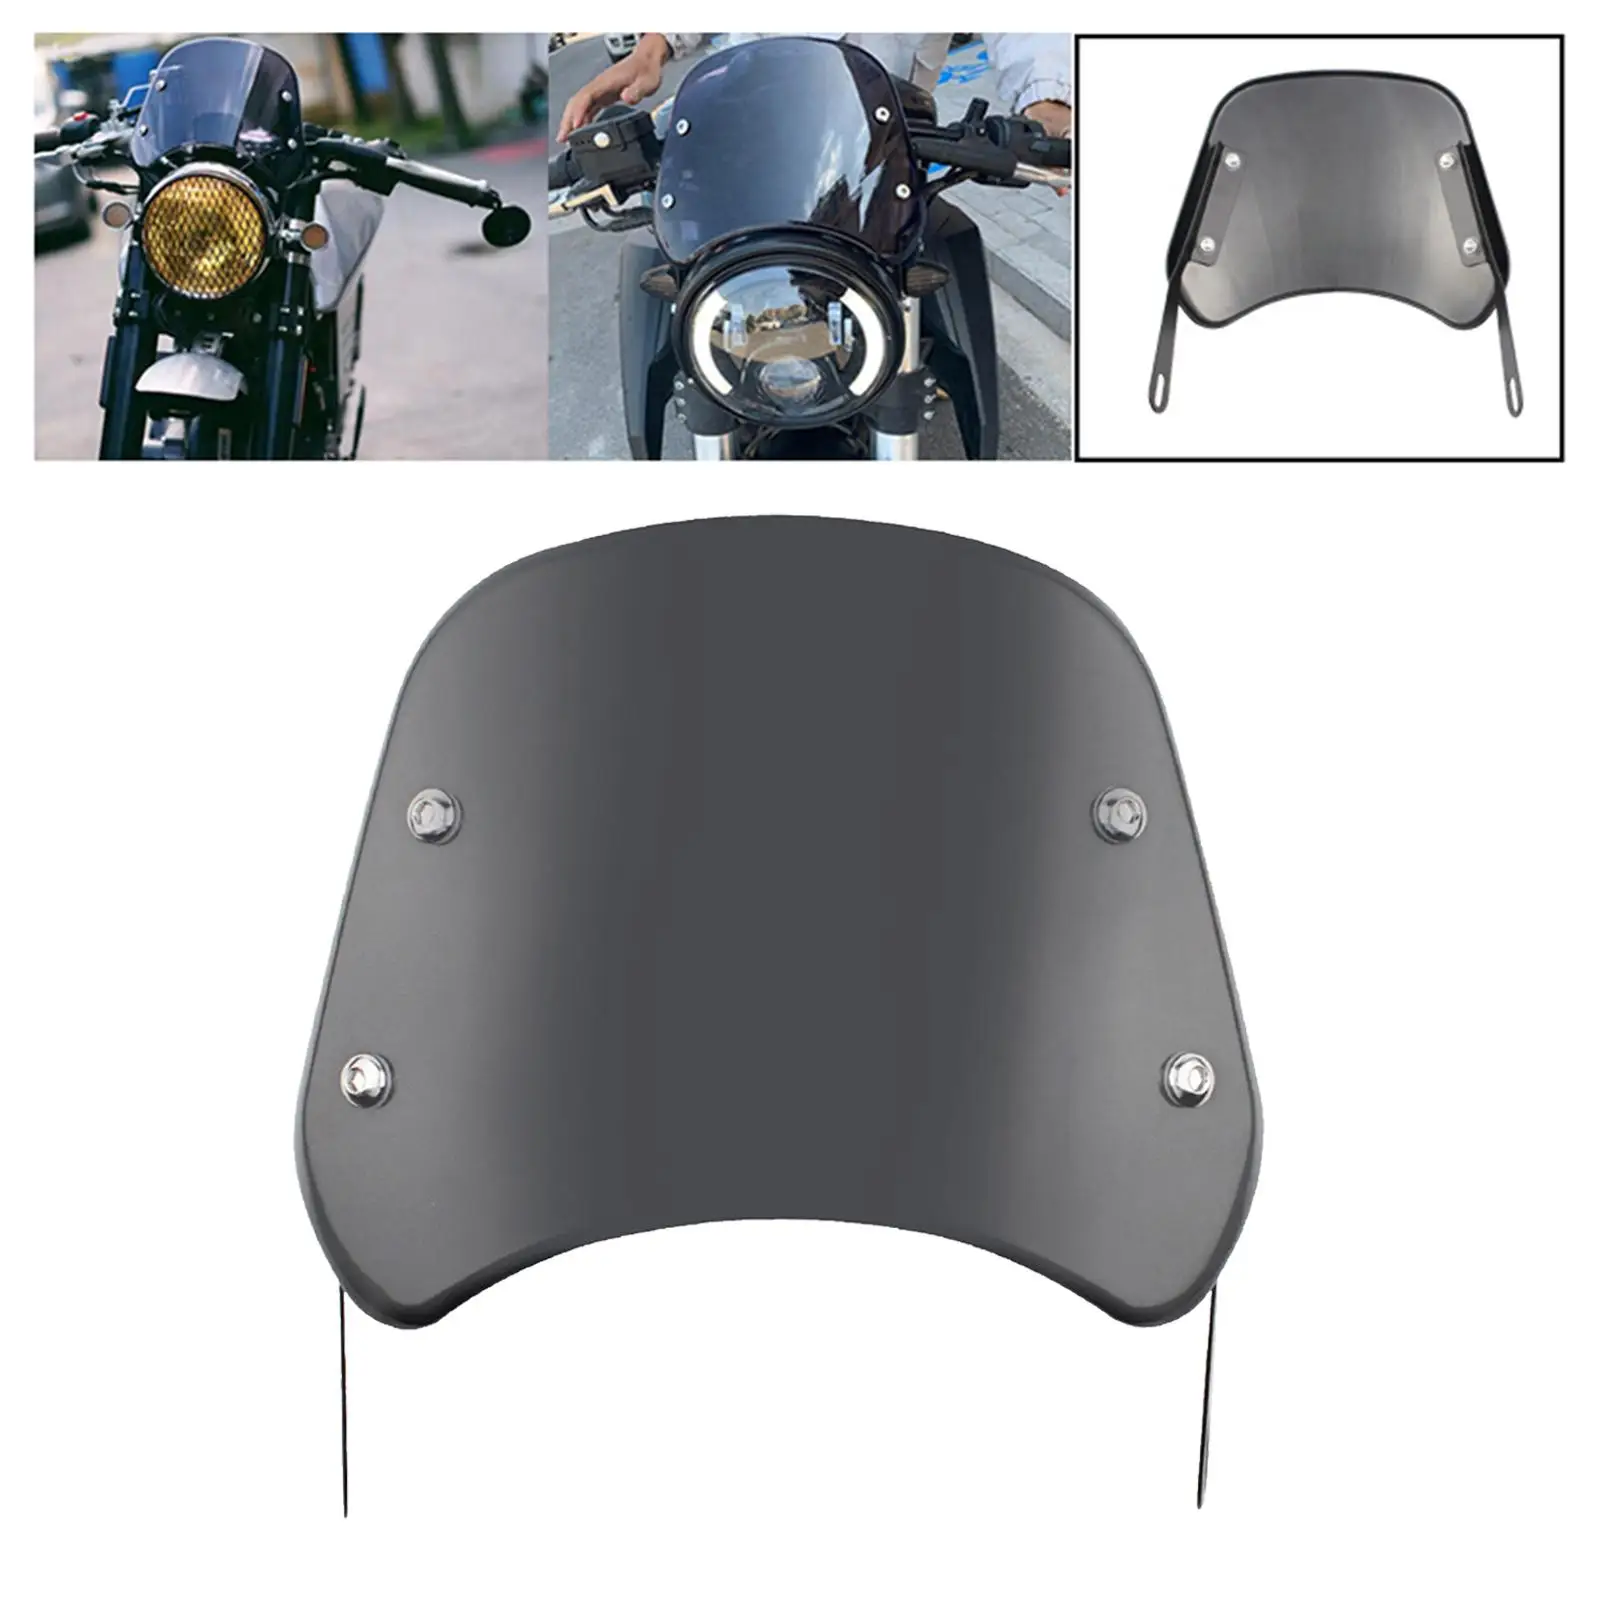 Front 5-7 inch Motorcycle Headlight Windshield, Wind Deflector Windscreen for Motorbike Compact Replacement accessories